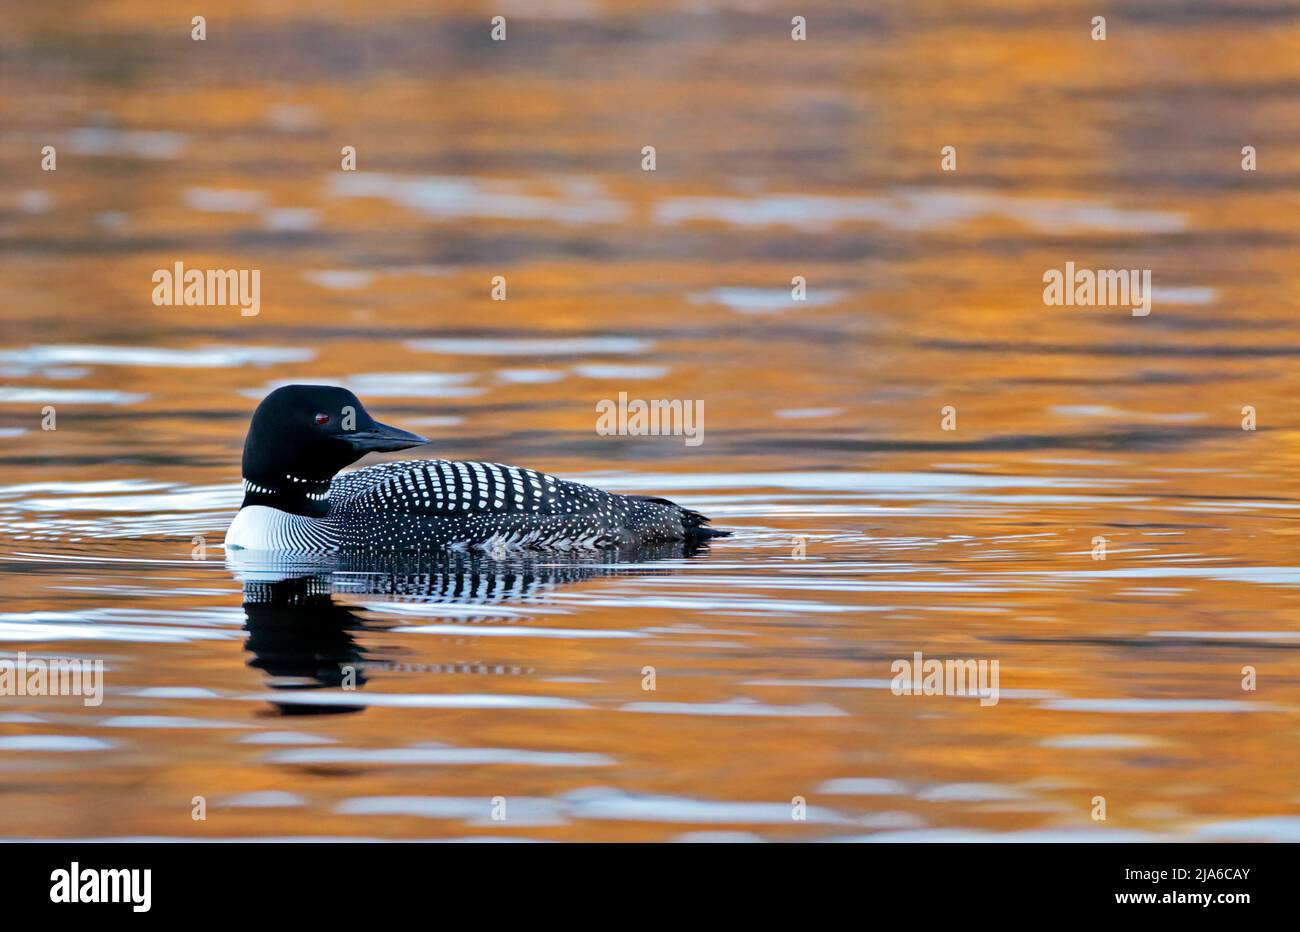 Common Loon floating on Lake sunset, with spectacular light reflecting in the calm water. Stock Photo